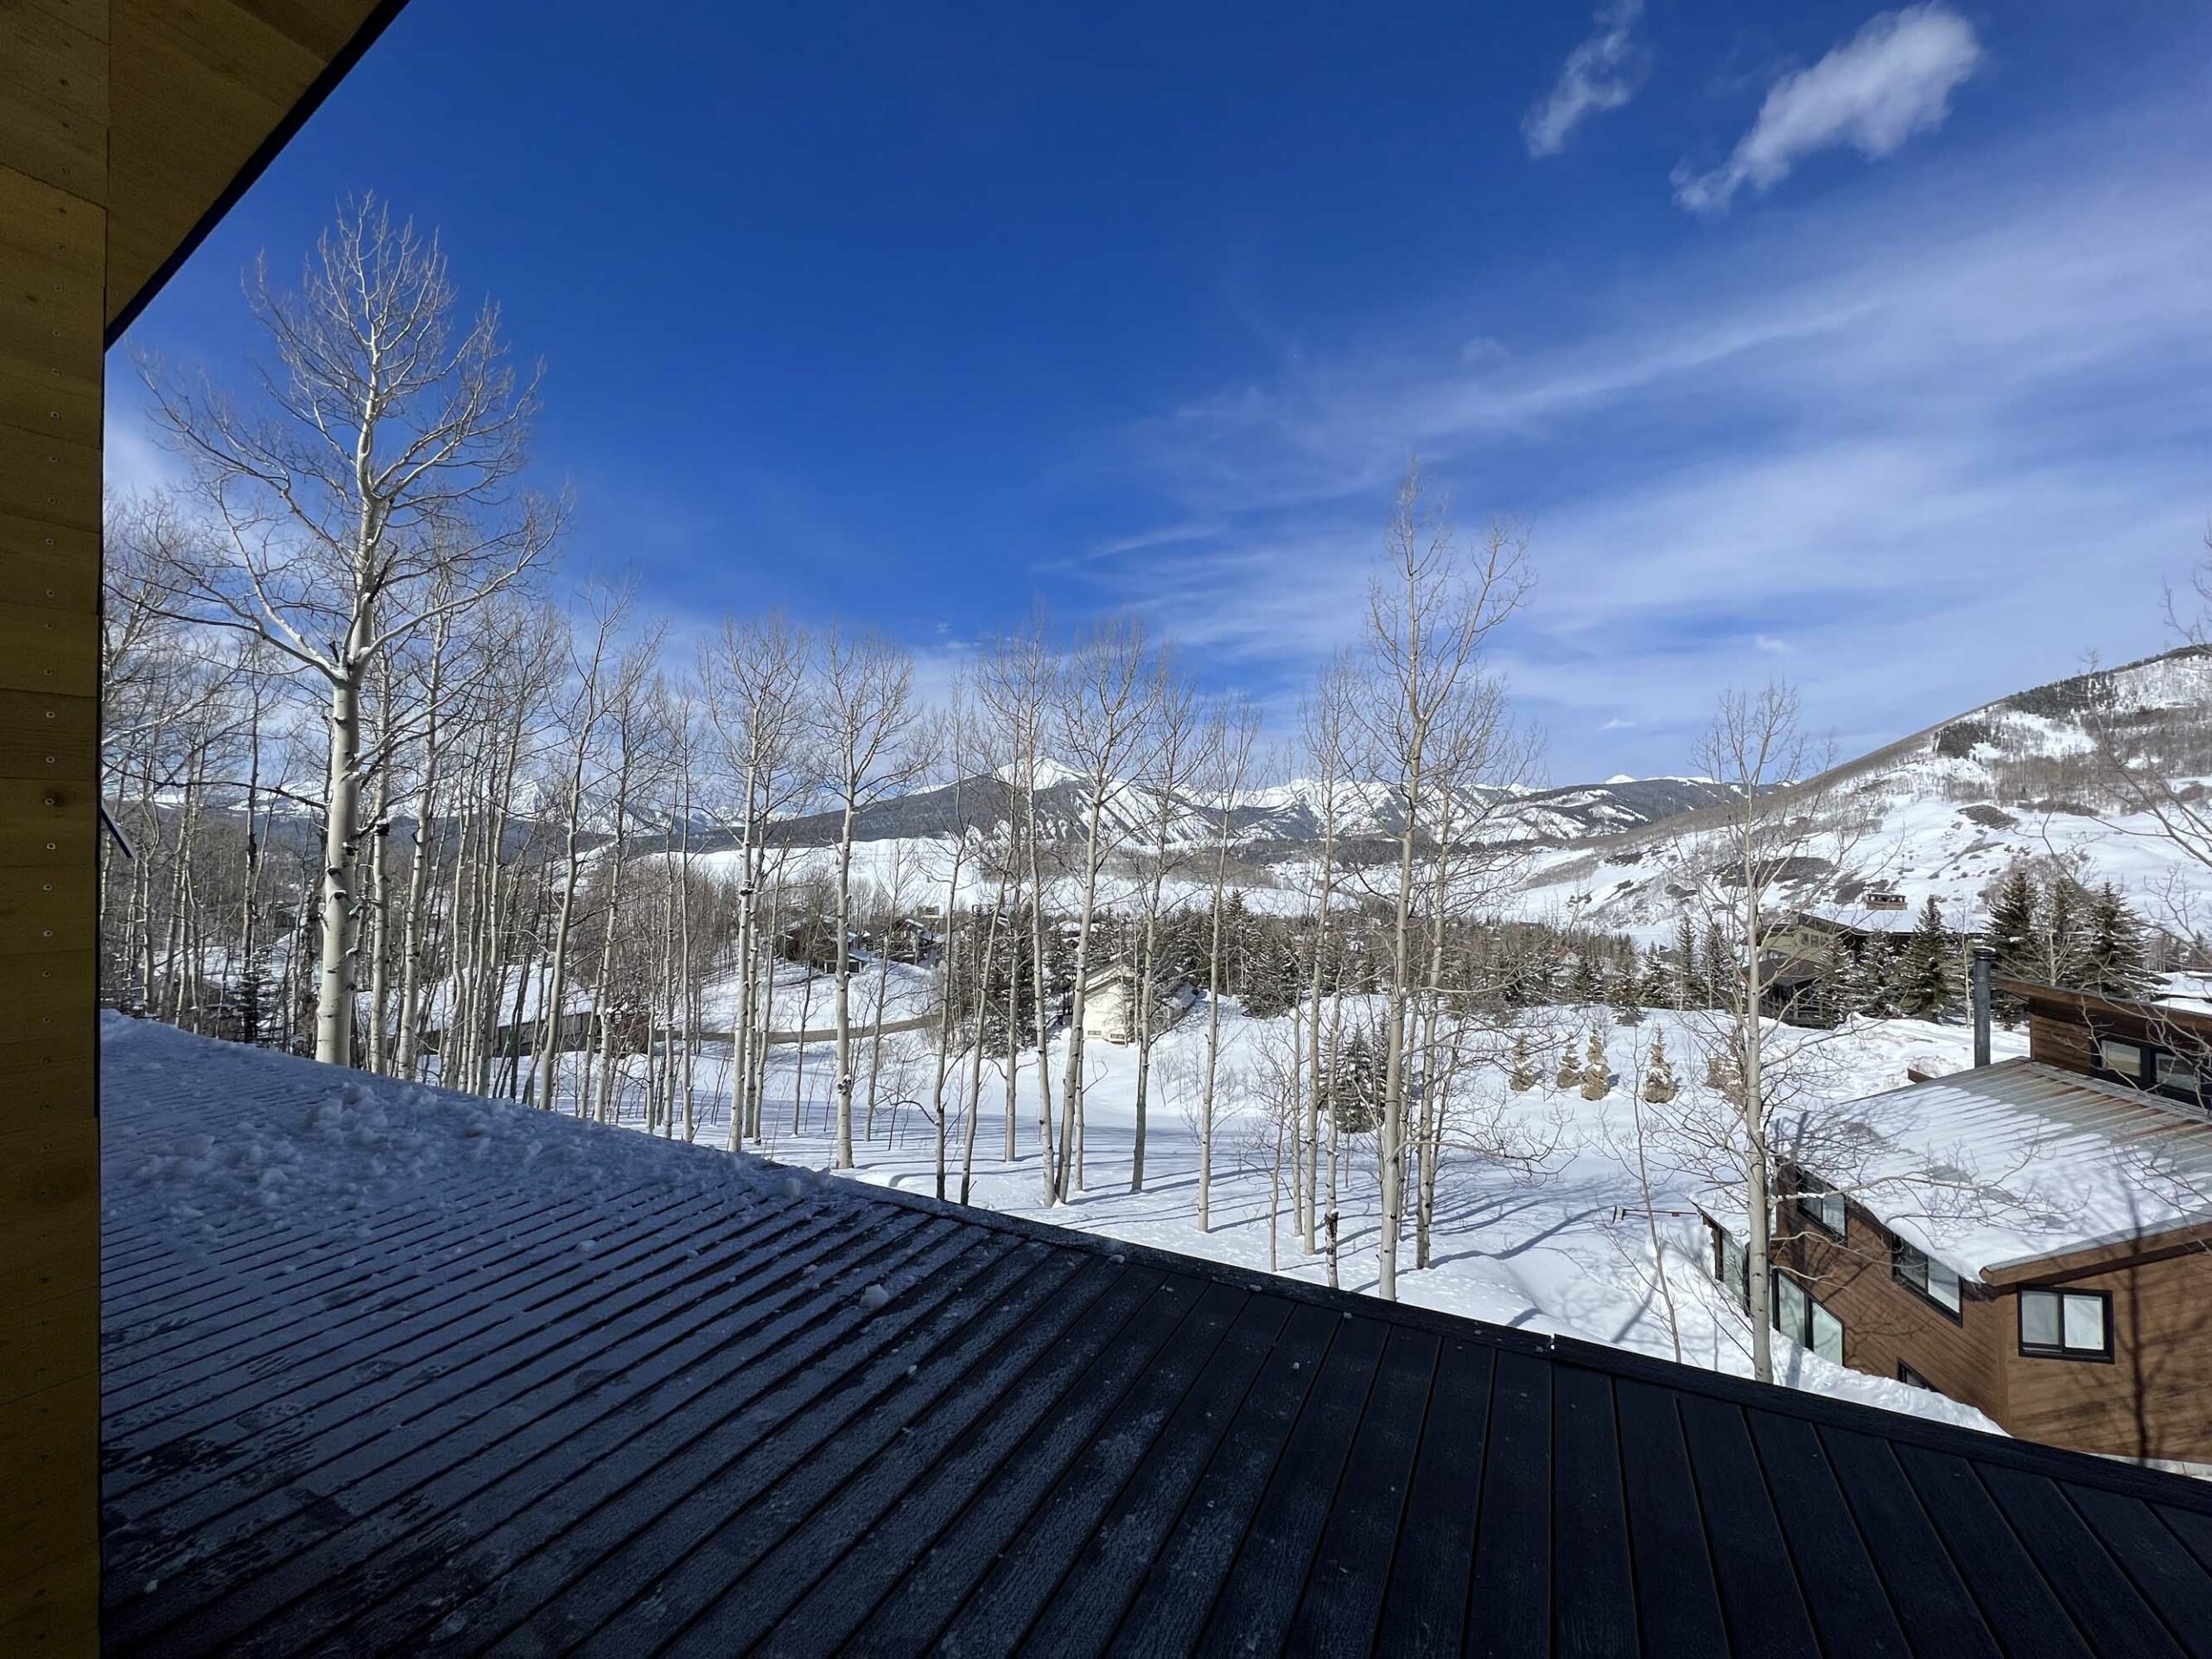 38 Ruby Drive Mt. Crested Butte, Colorado - mountain views